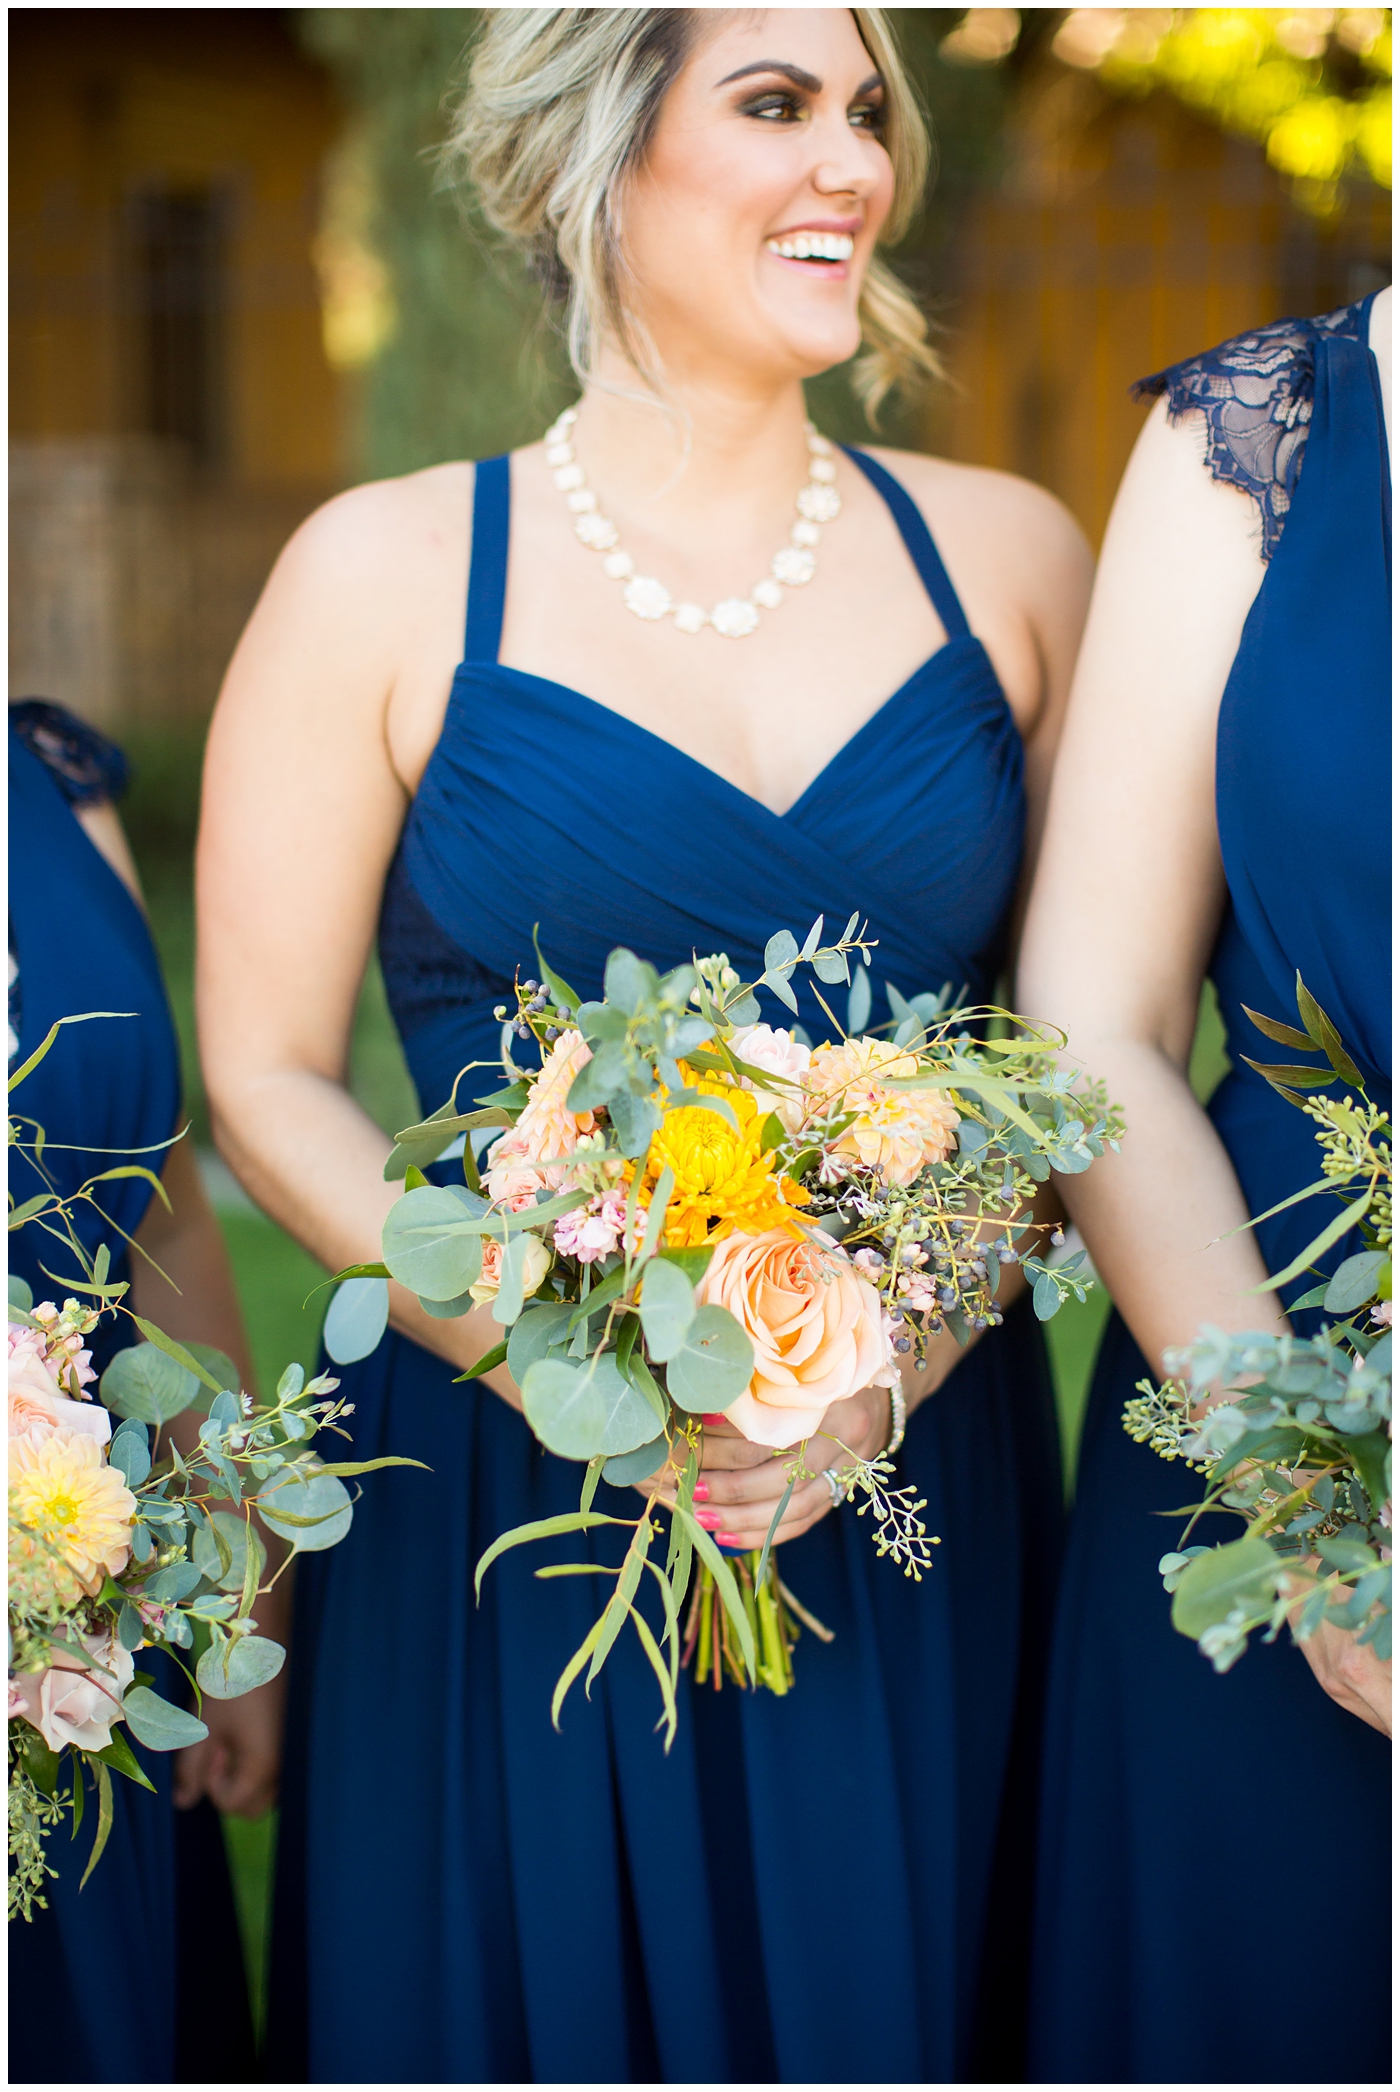 Bridesmaid bouquet with orange roses, greenery, yellow flowers